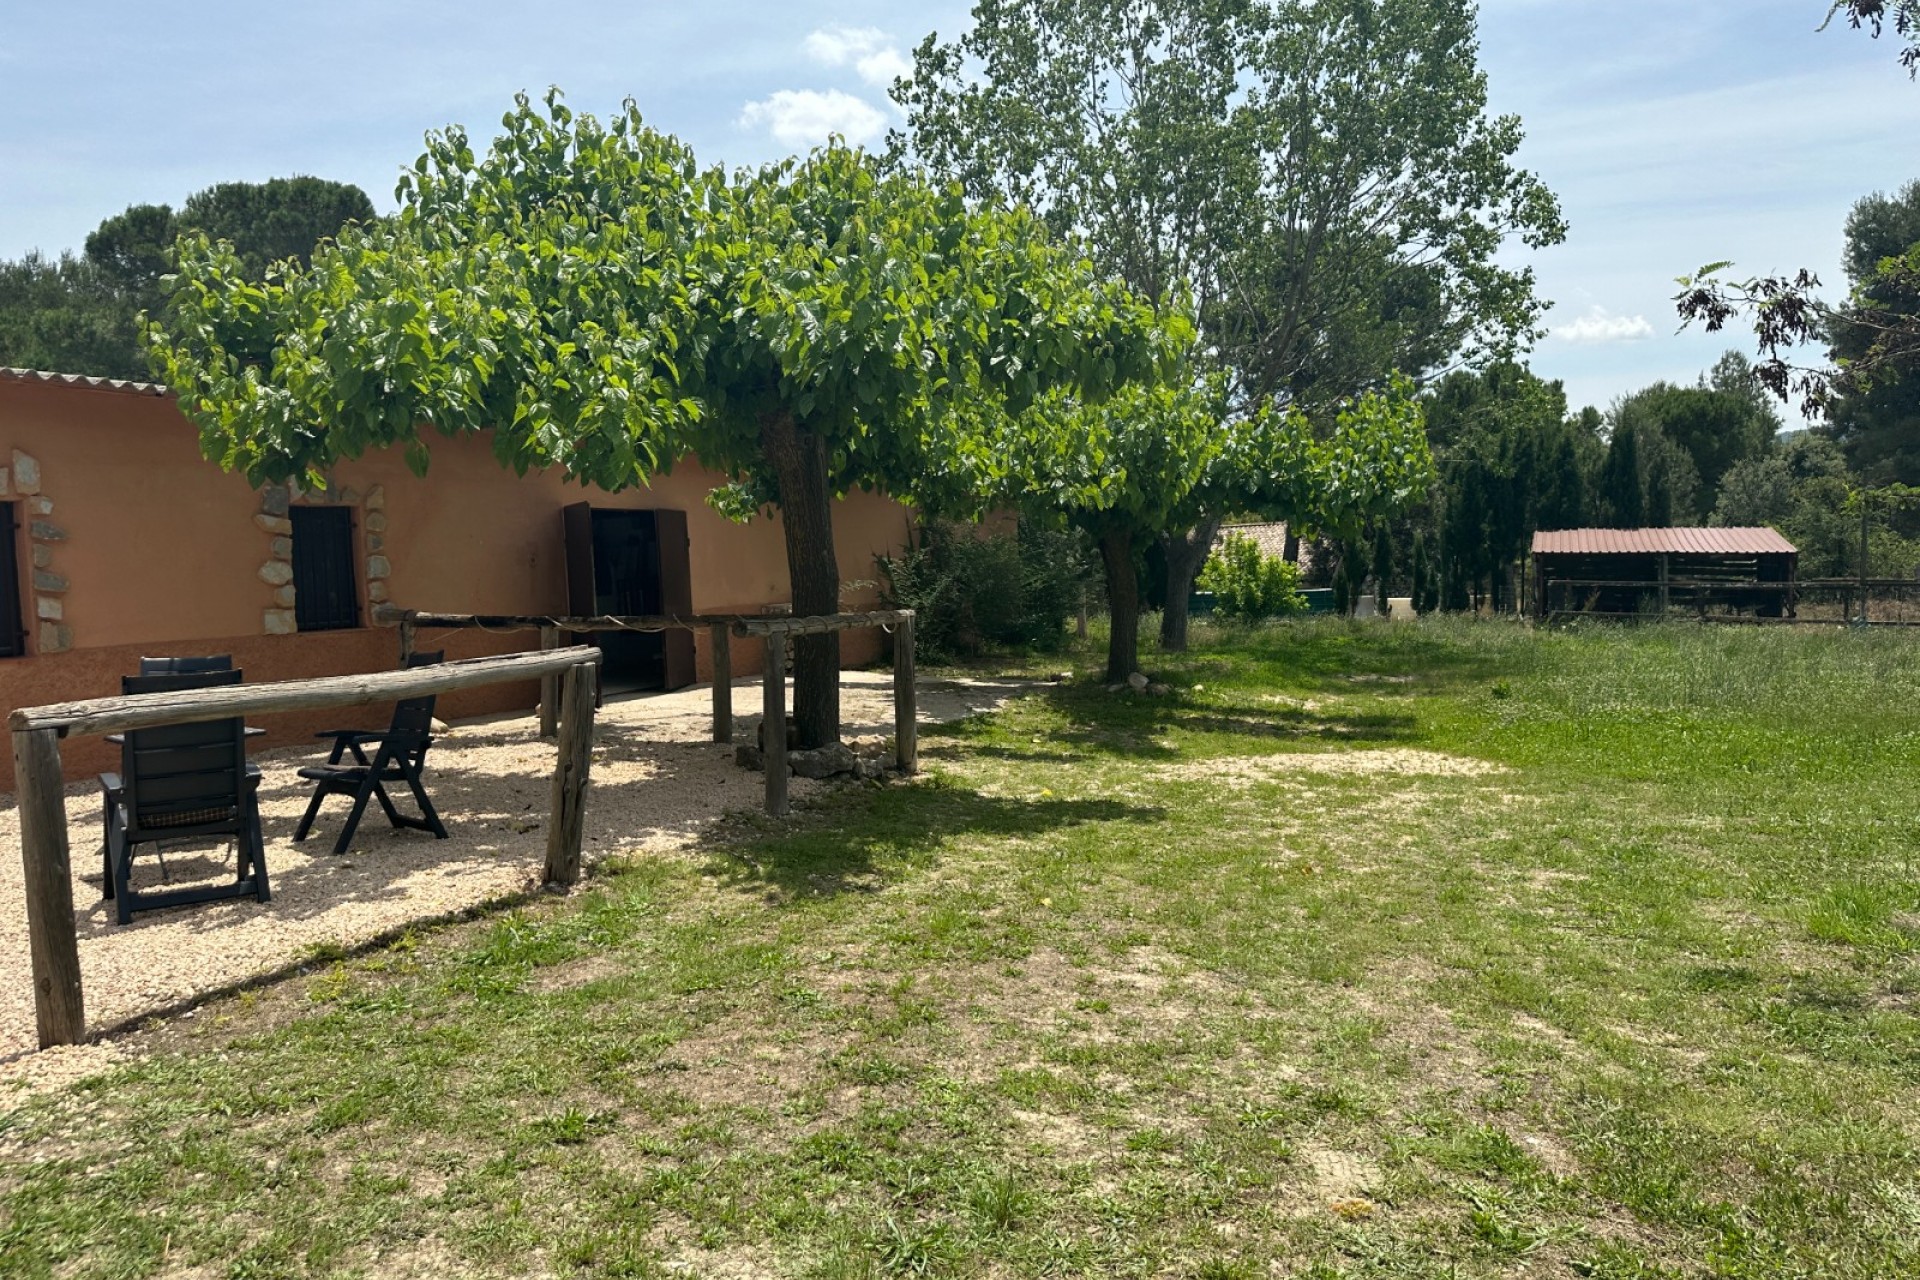 Herverkoop - Country House -
Bocairent - Inland